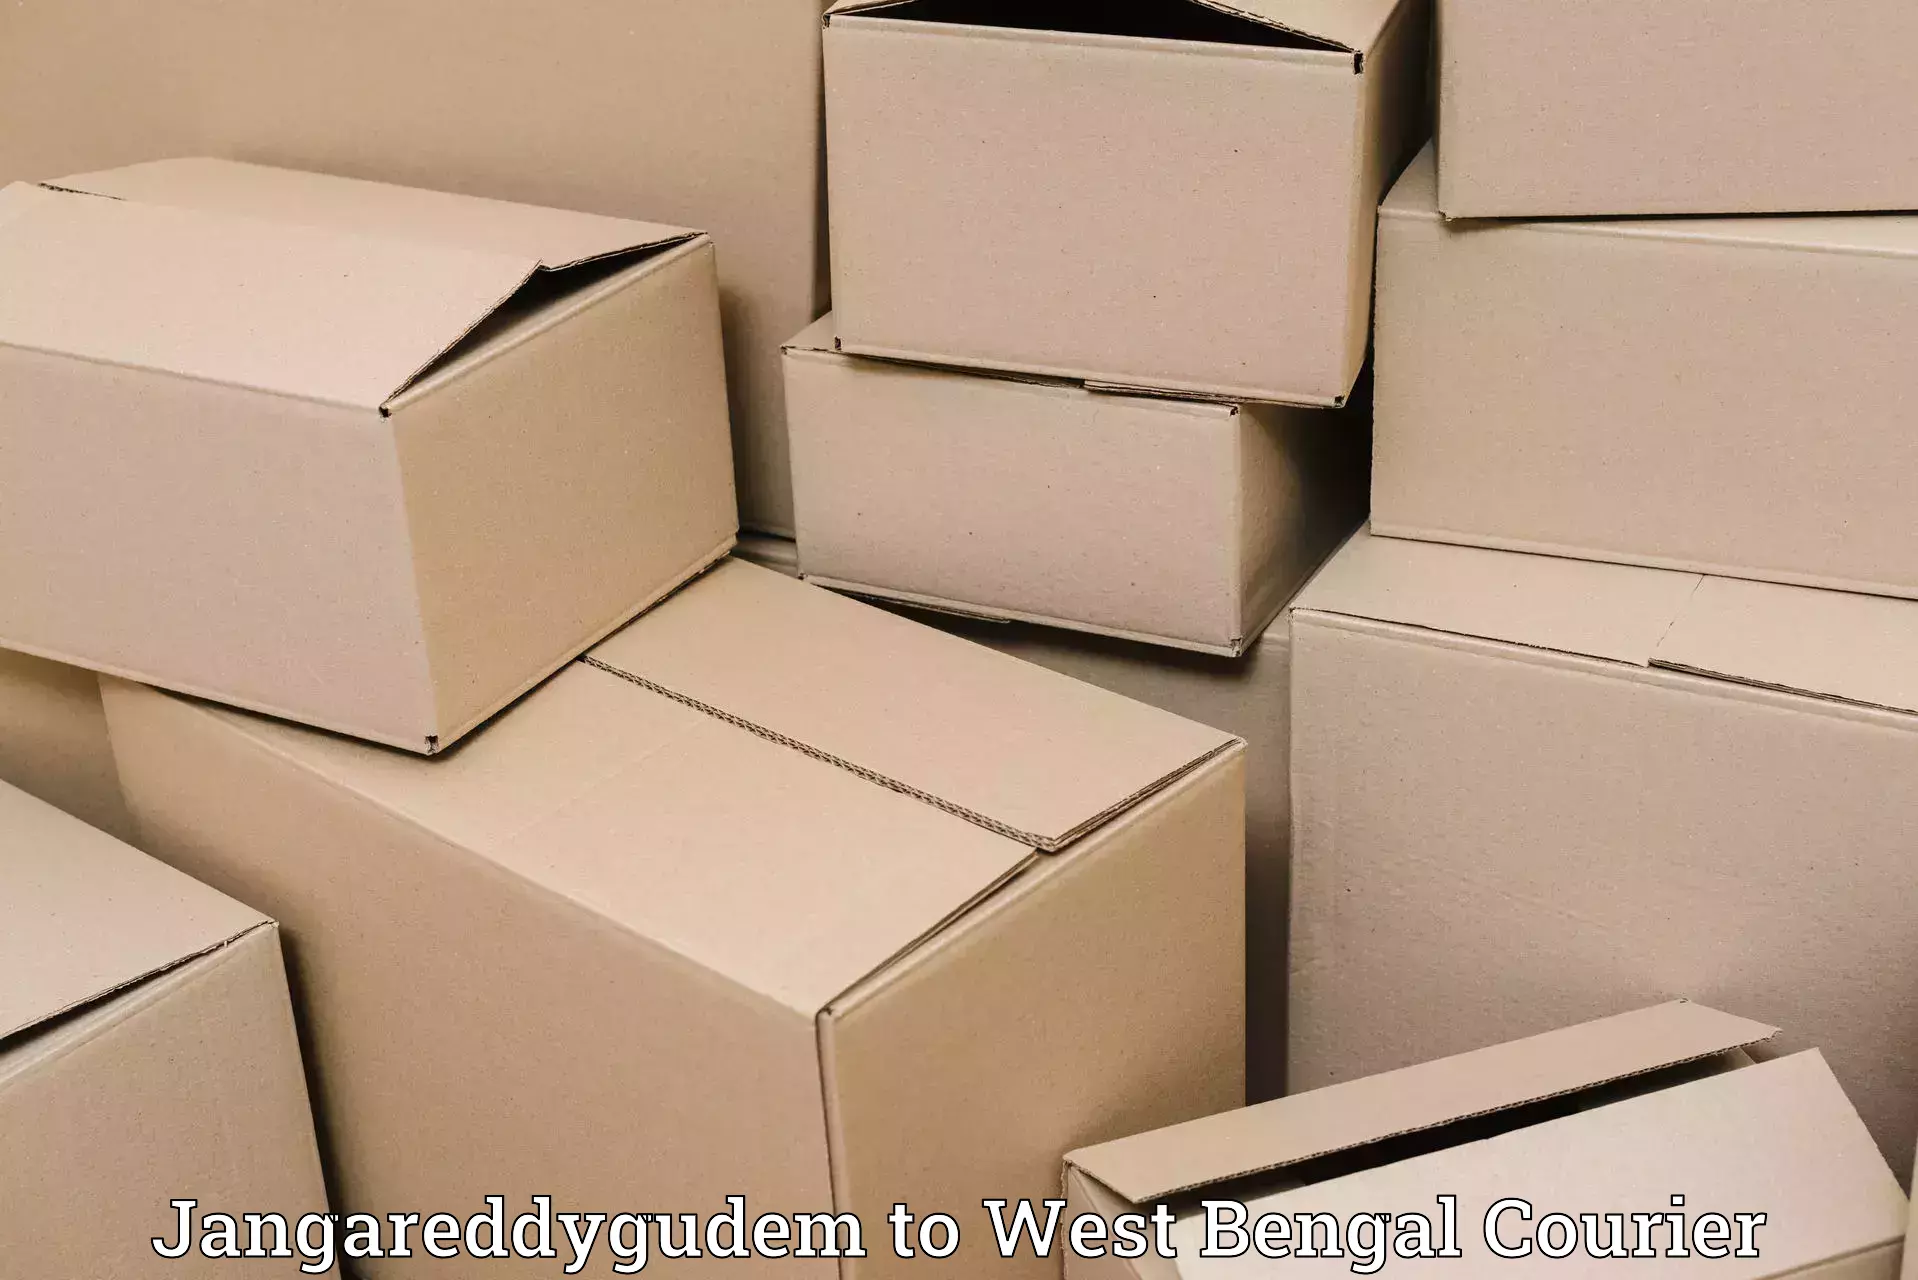 Specialized courier services in Jangareddygudem to Jaigaon